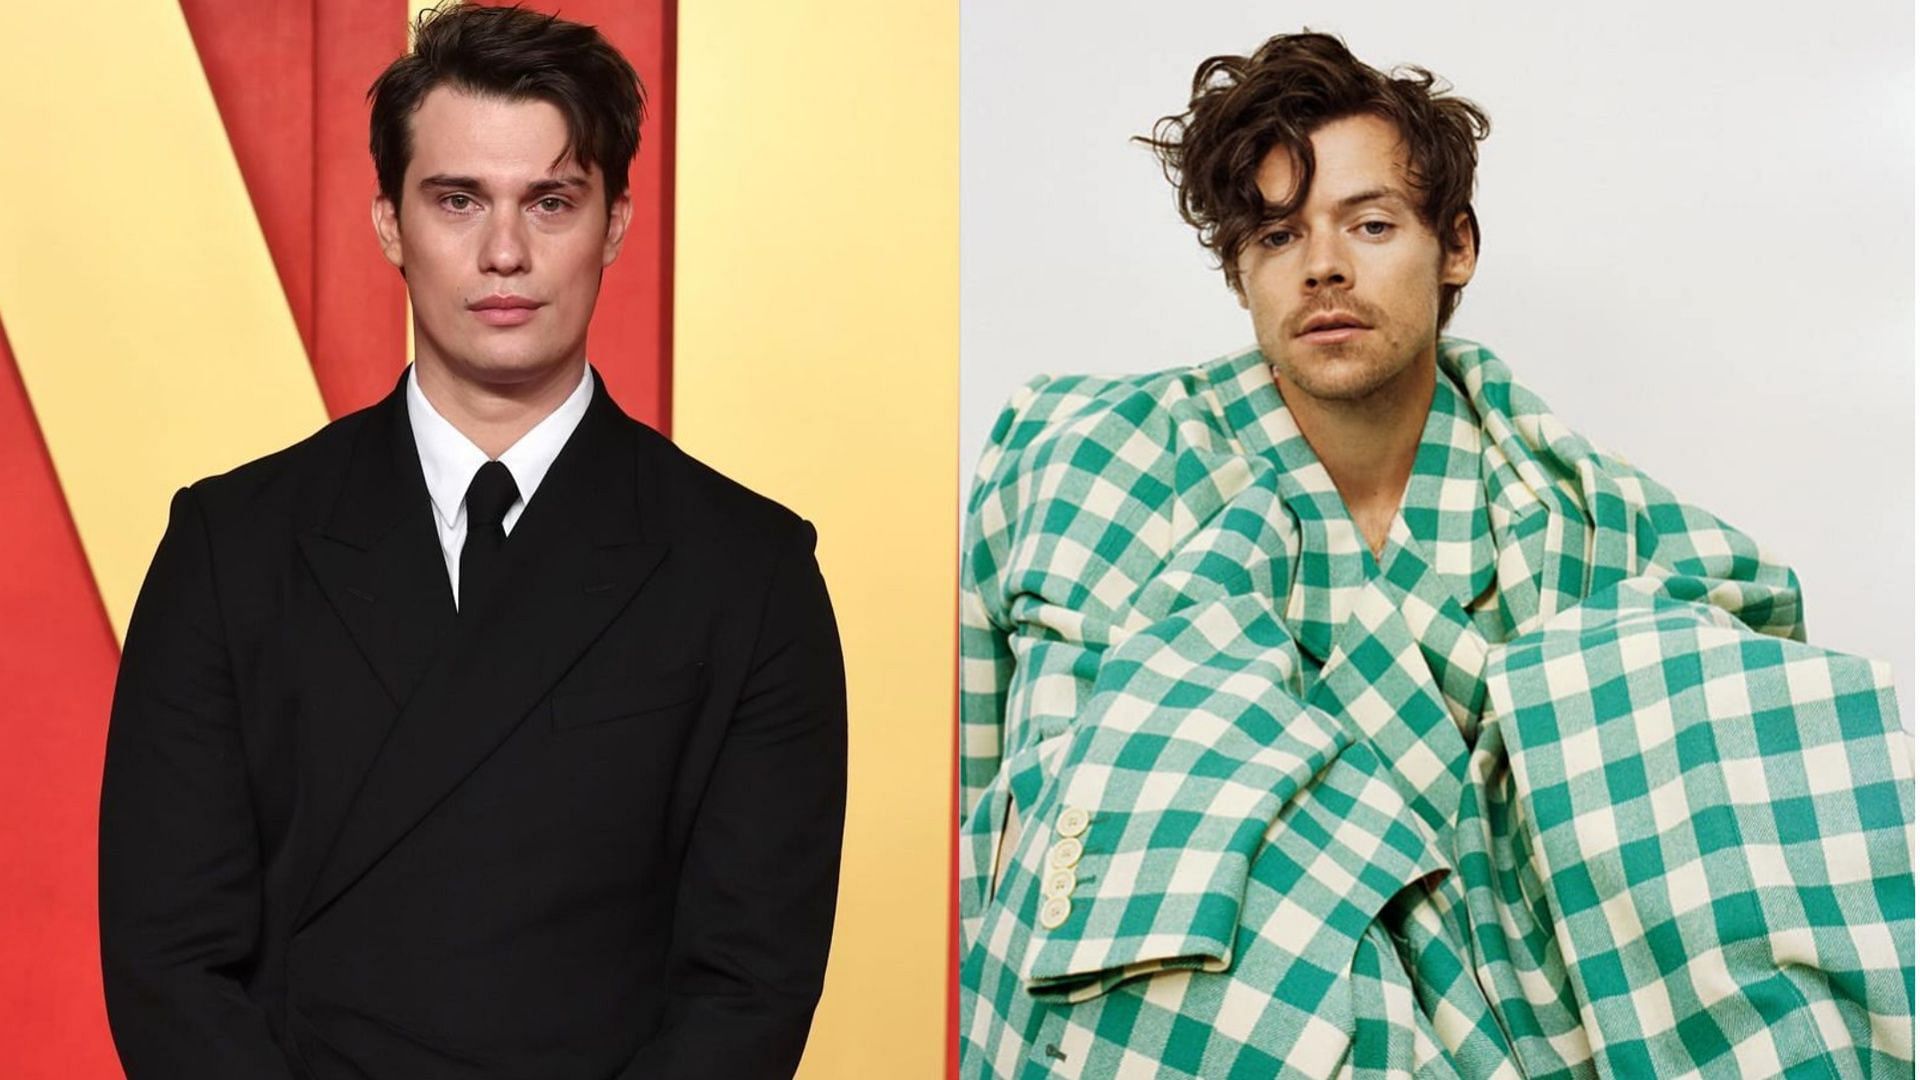 Nicholas Galitzine talked about his recent movie and his character that has been compared with Harry Styles (Image via Instagram / @nicholasgalitzine / Facebook / Harry Styles)